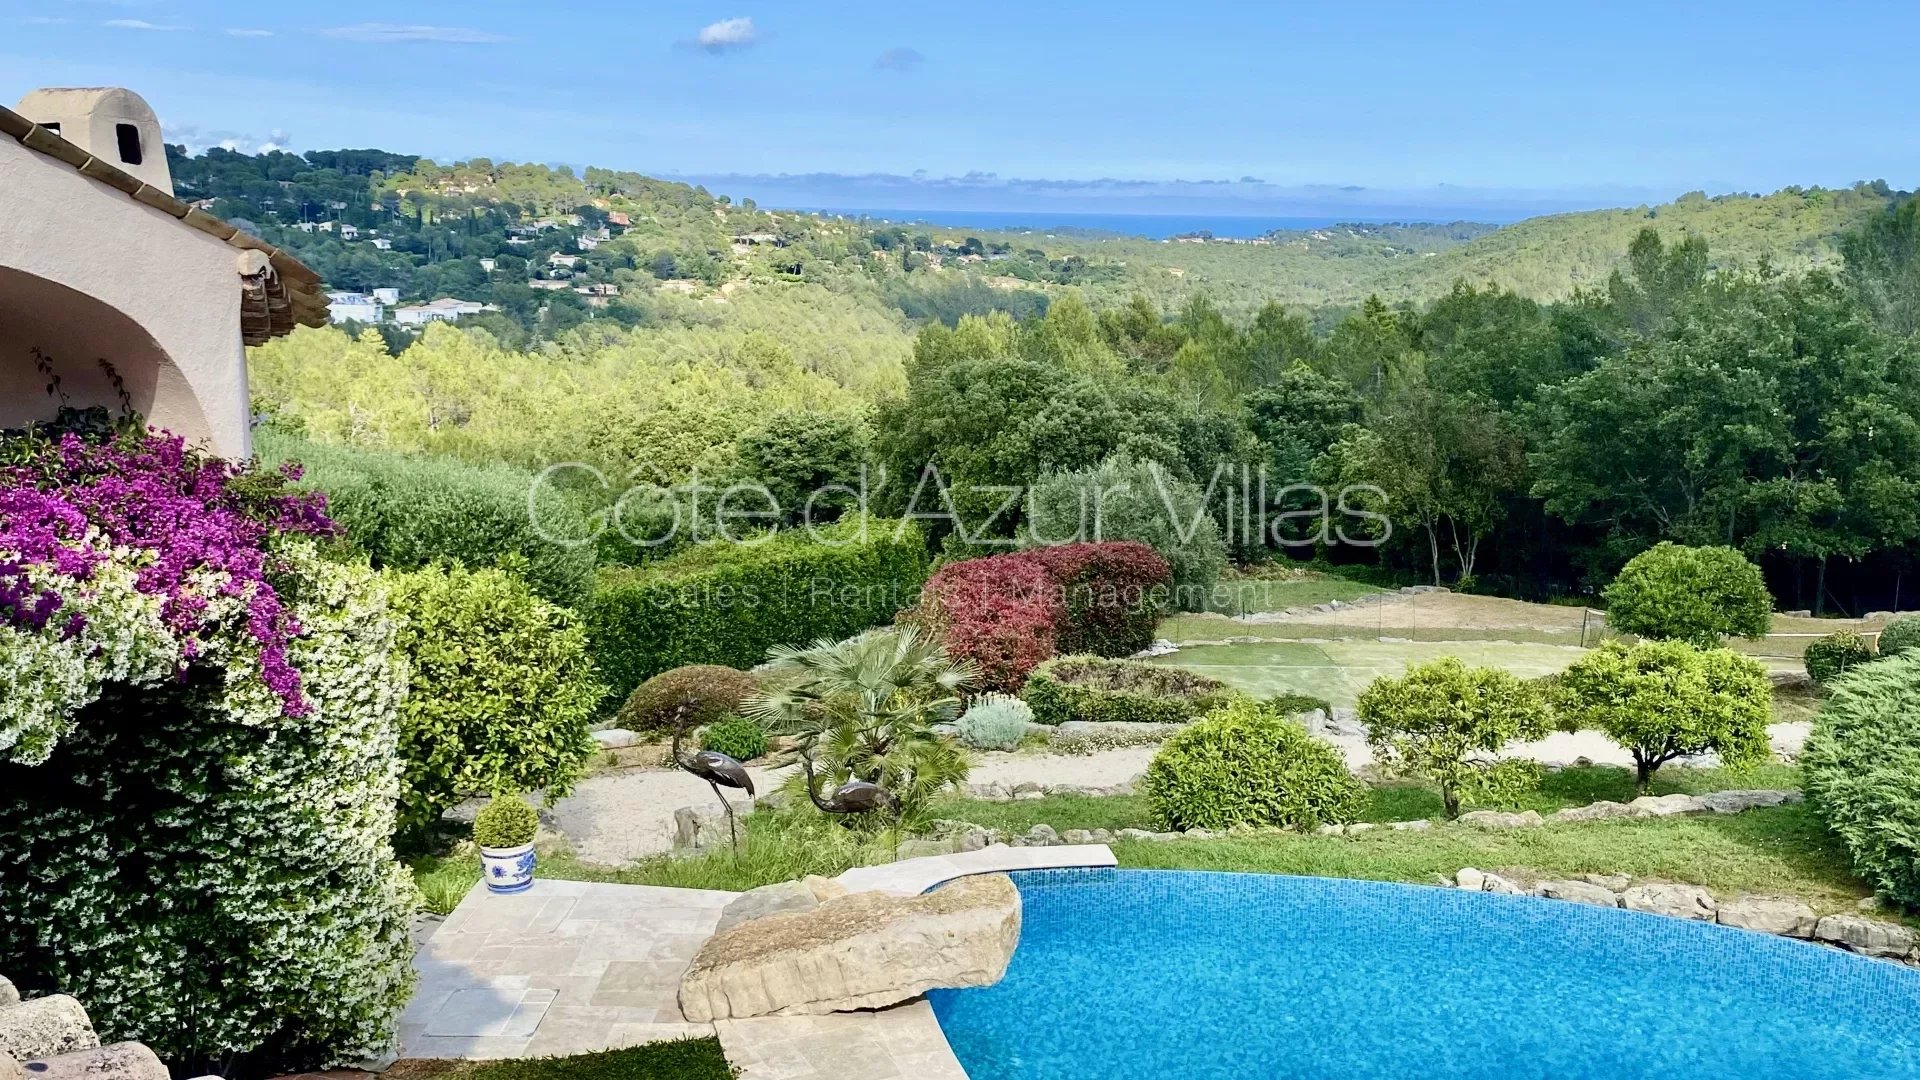 SOLE AGENT VALBONNE - 6 BEDROOM VILLA WITH PANORAMIC SEAVIEW